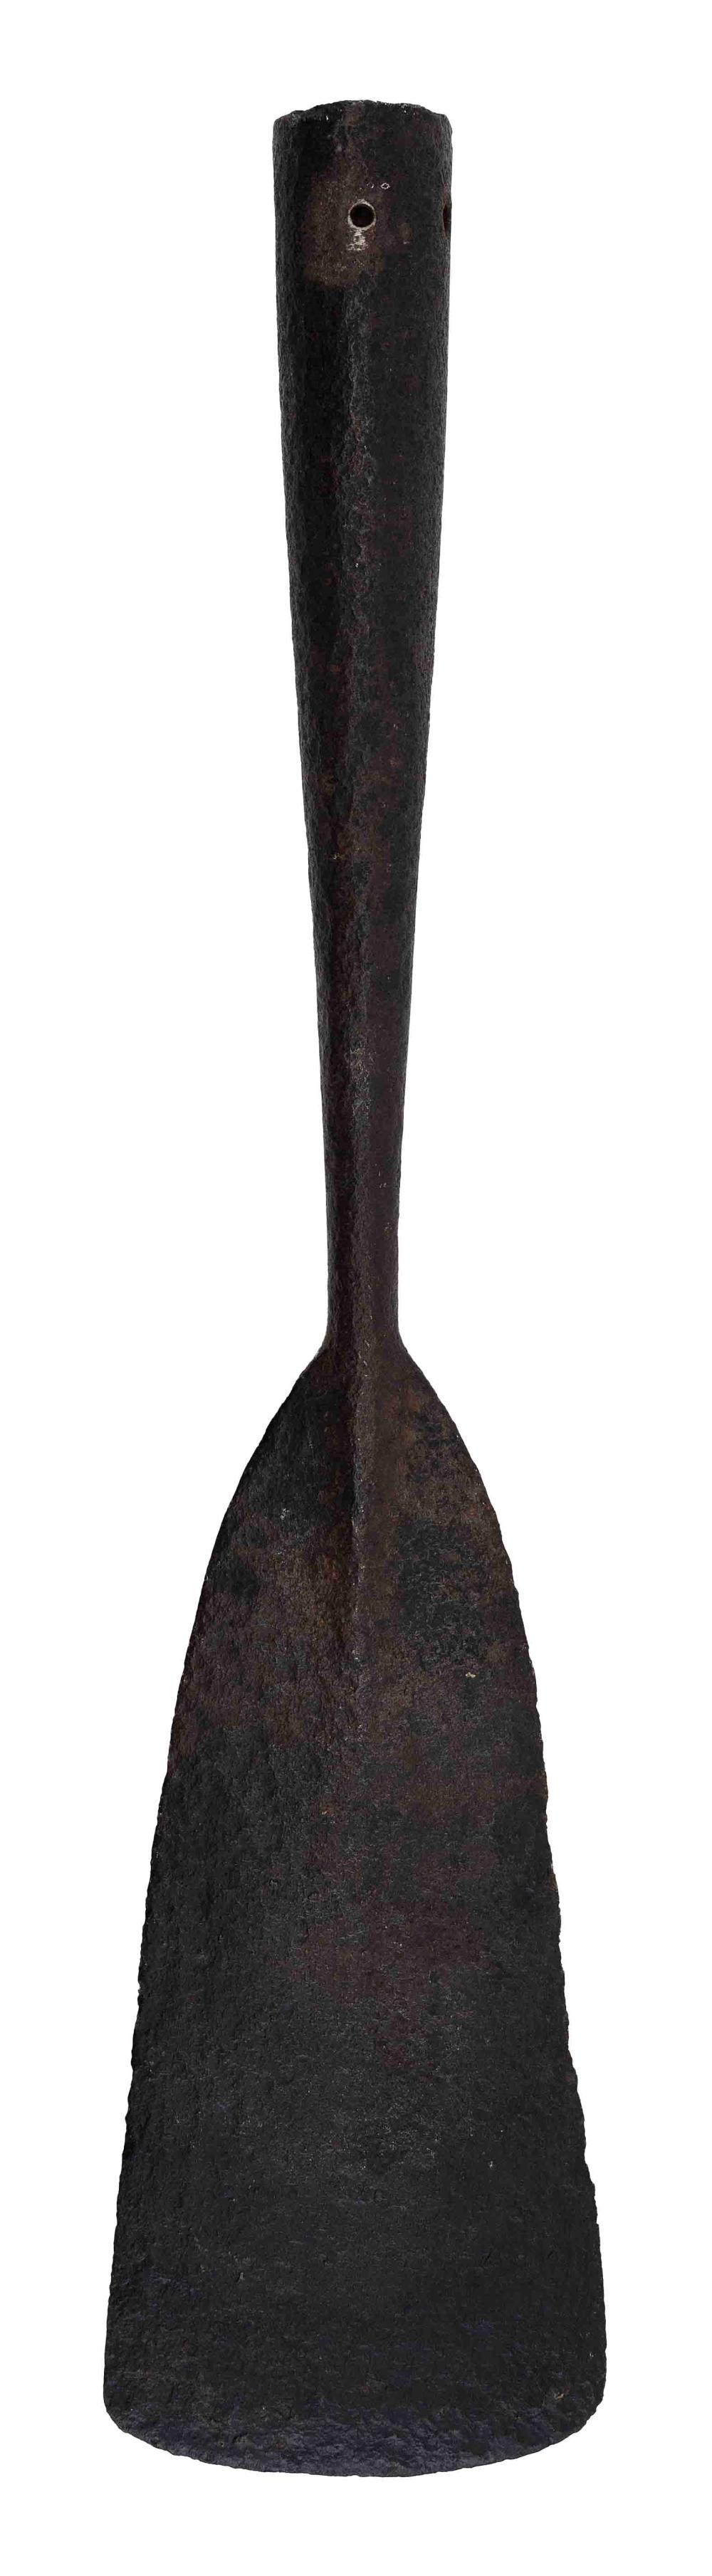 WROUGHT IRON BLUBBER SPADE MID-19TH